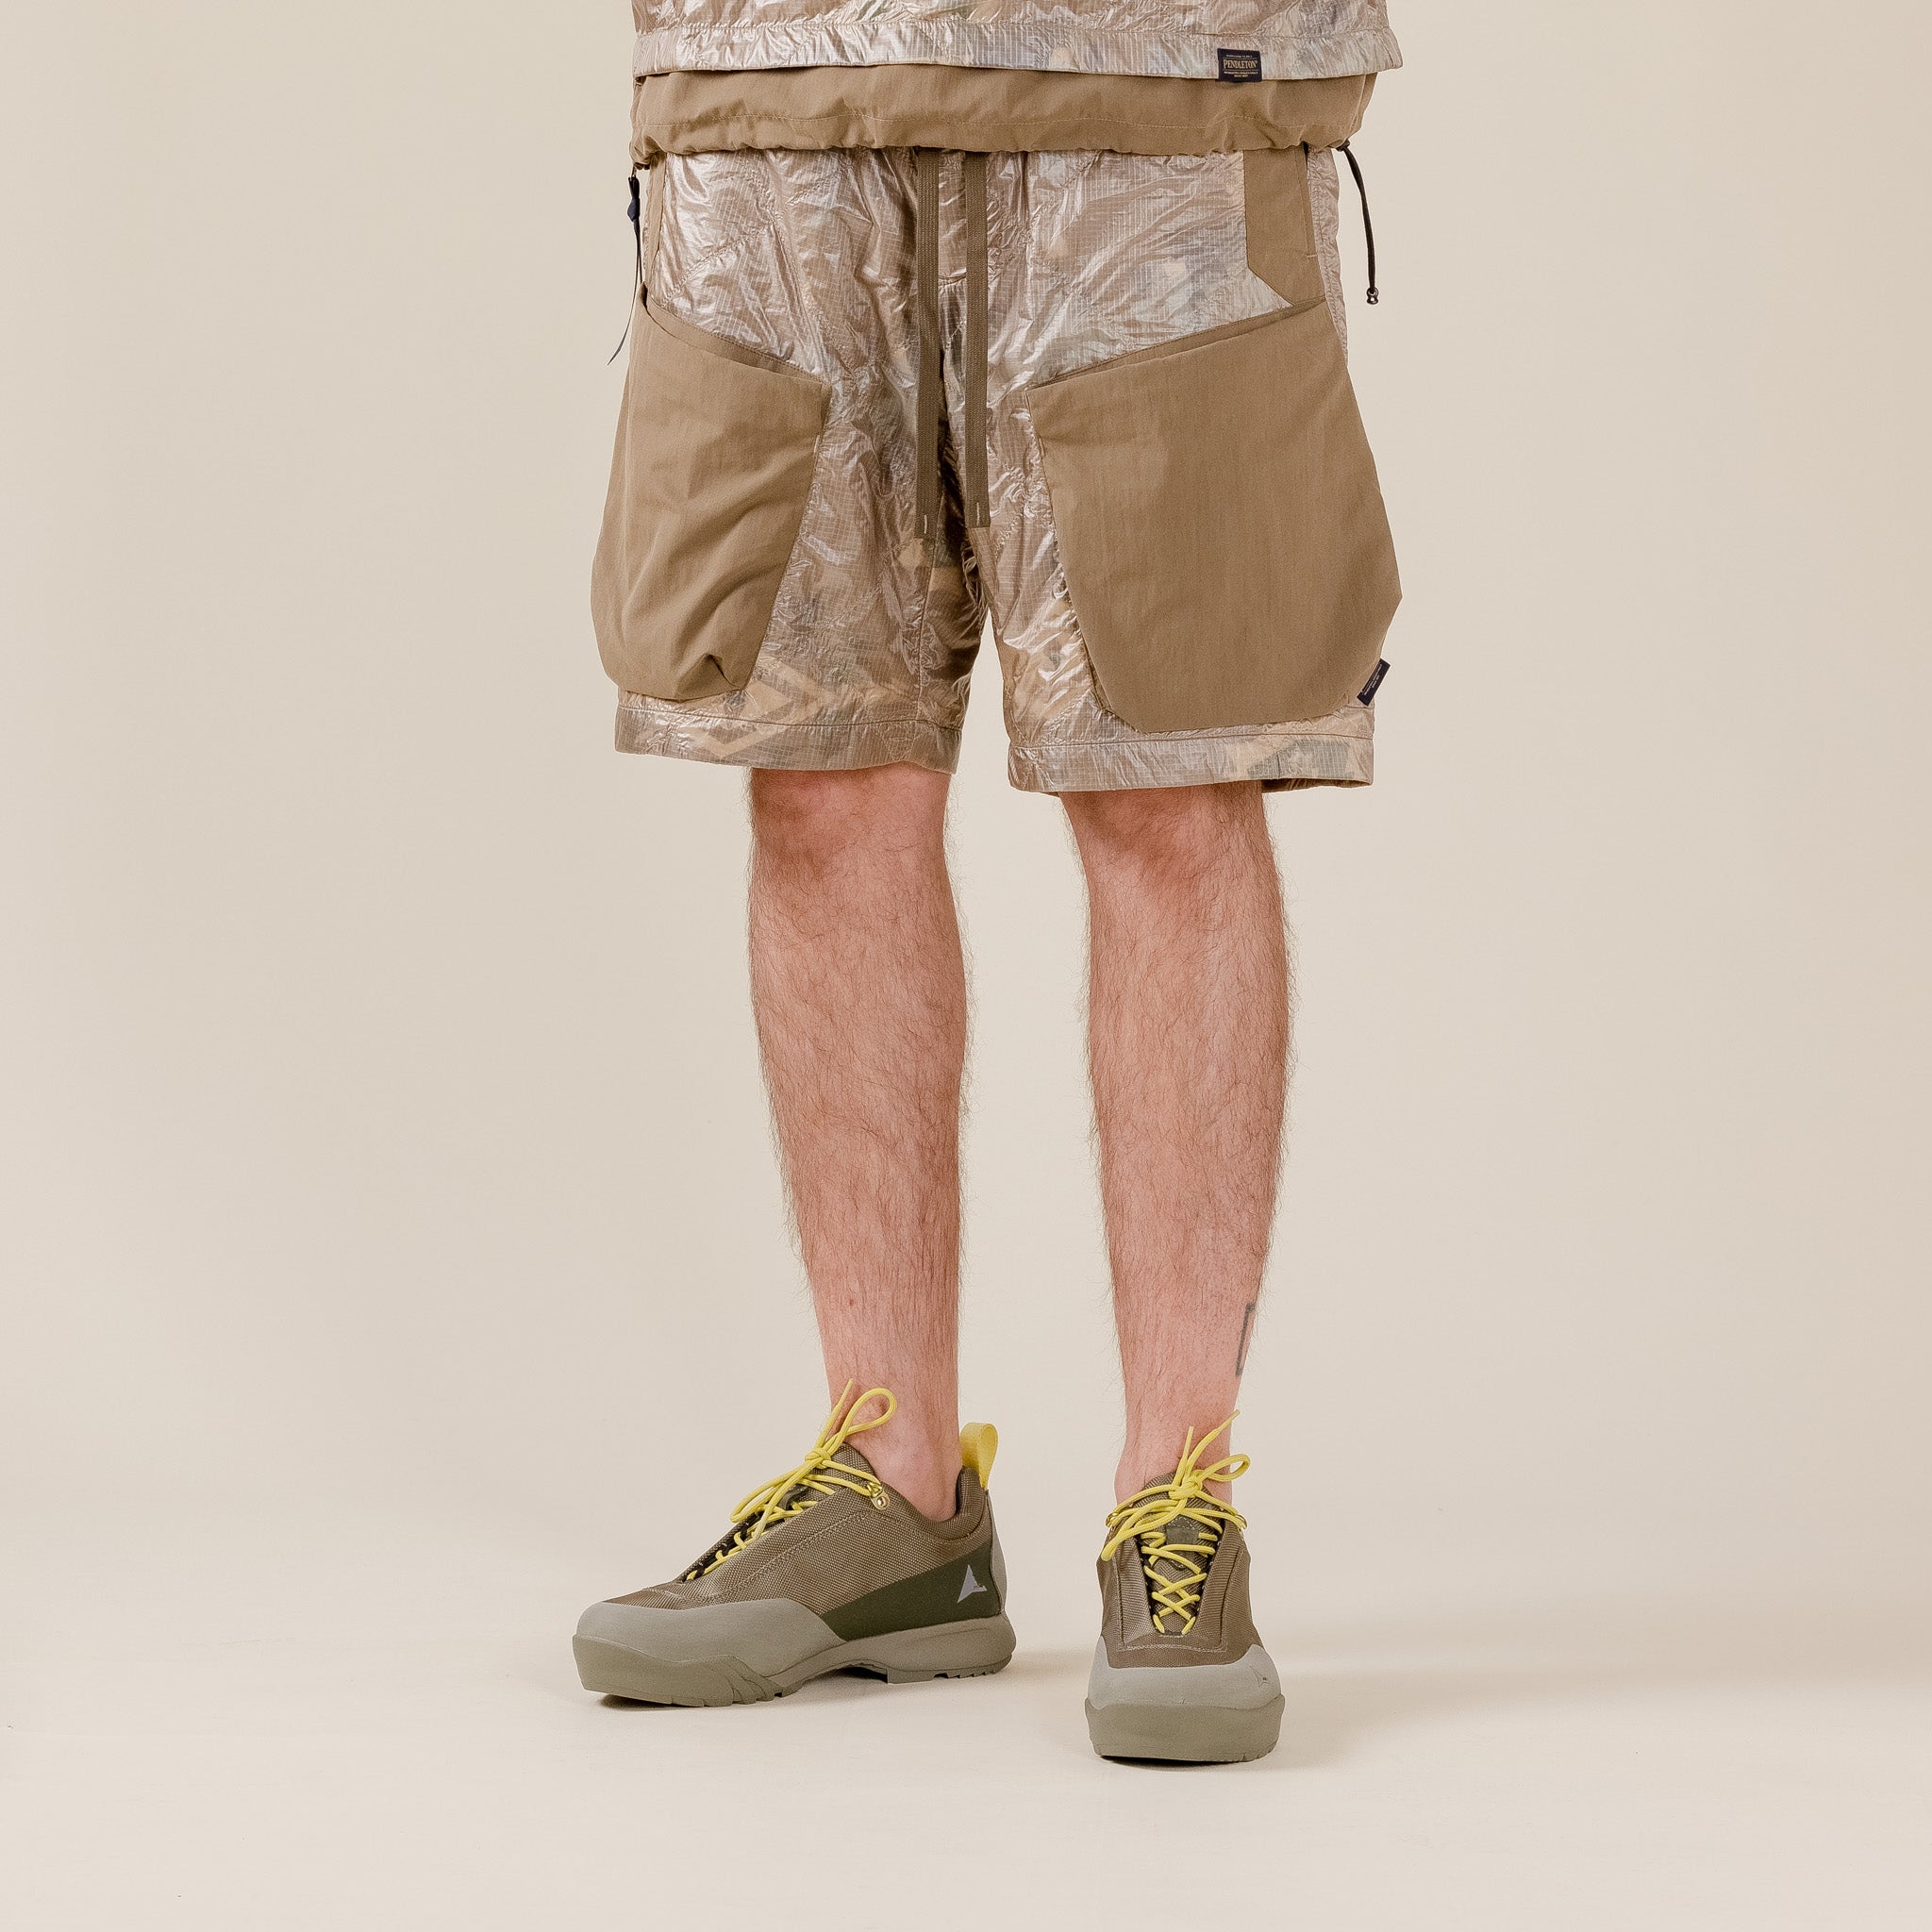 Poliquant x Pendleton - Quilted Effect Shorts - Khaki "poliquant stockists" "poliquant japan" "poliquant stockists uk" "poliquant stockists usa"